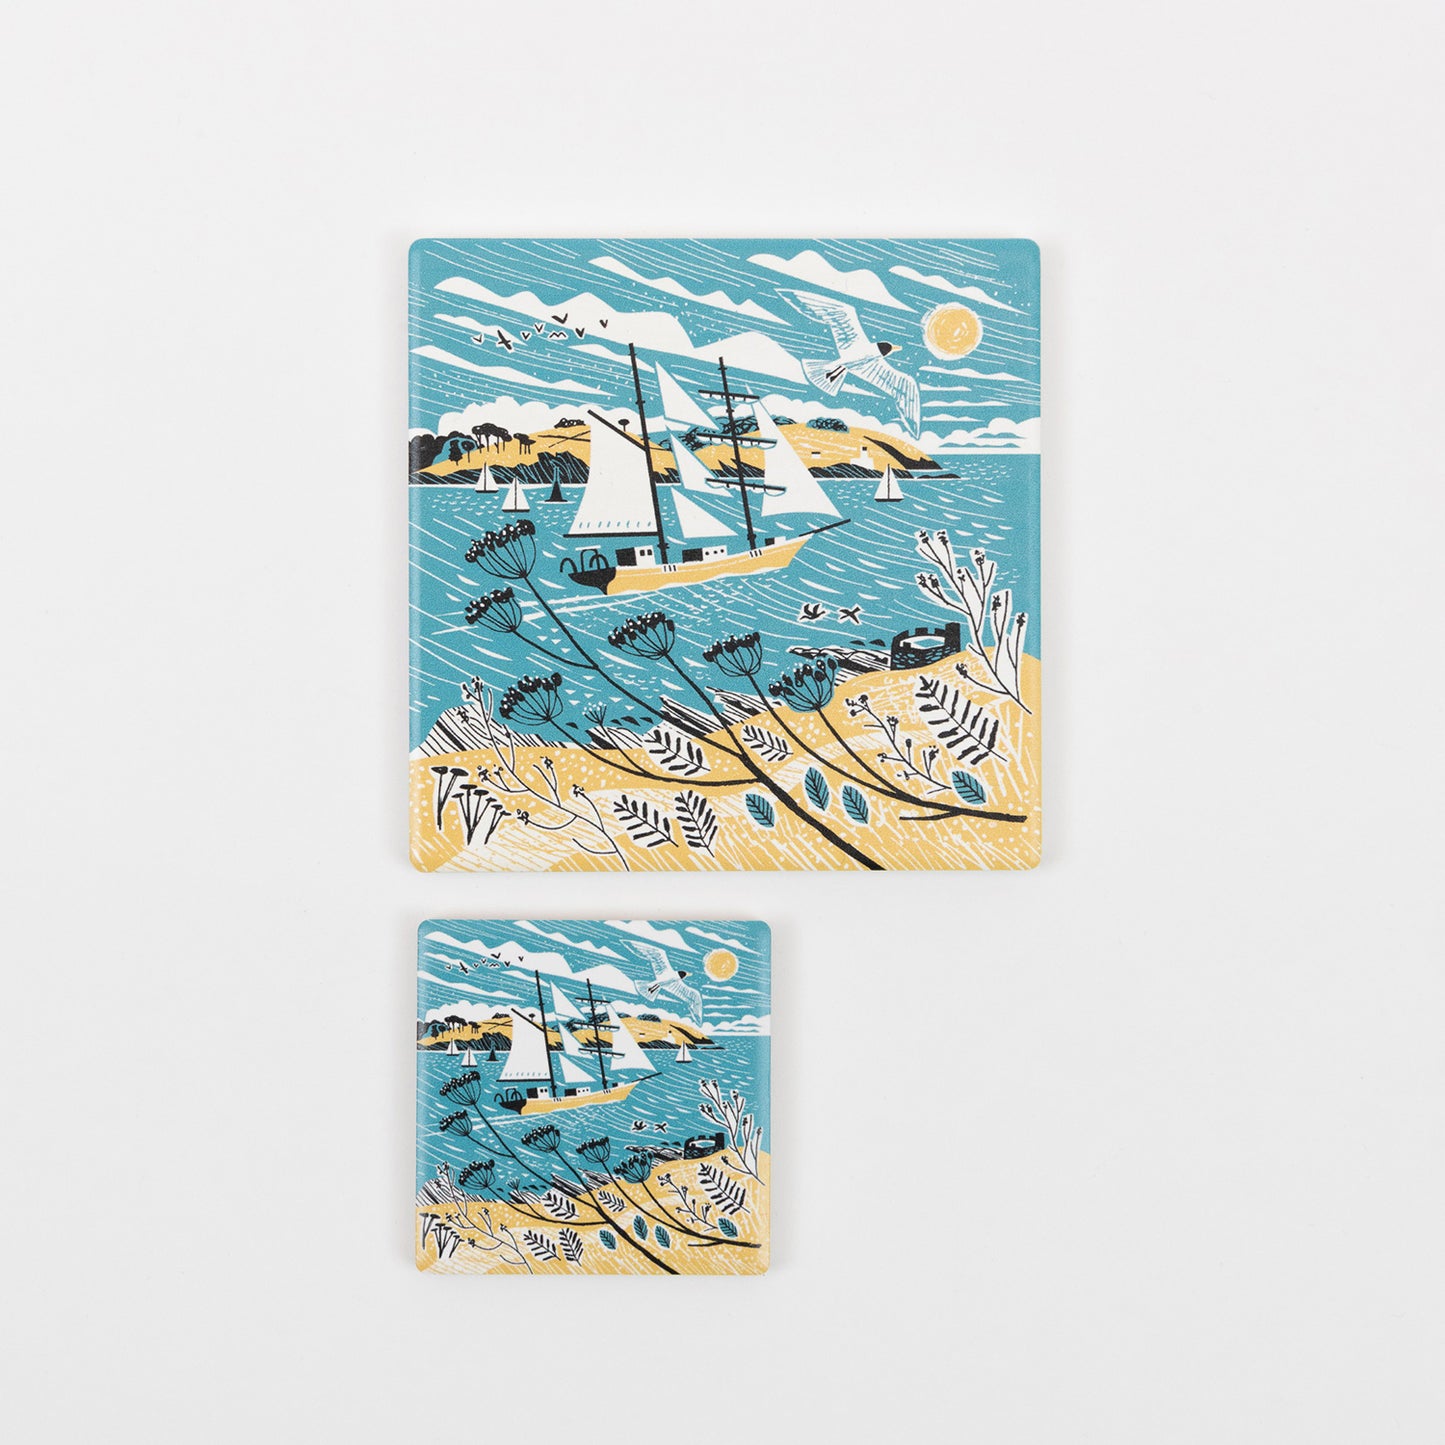 Falmouth Tall Ships Magnet in a blue, yellow and white design featuring a tall ship in full sail. The smaller magnet sits alongside the Falmouth Tall Ships Coaster.